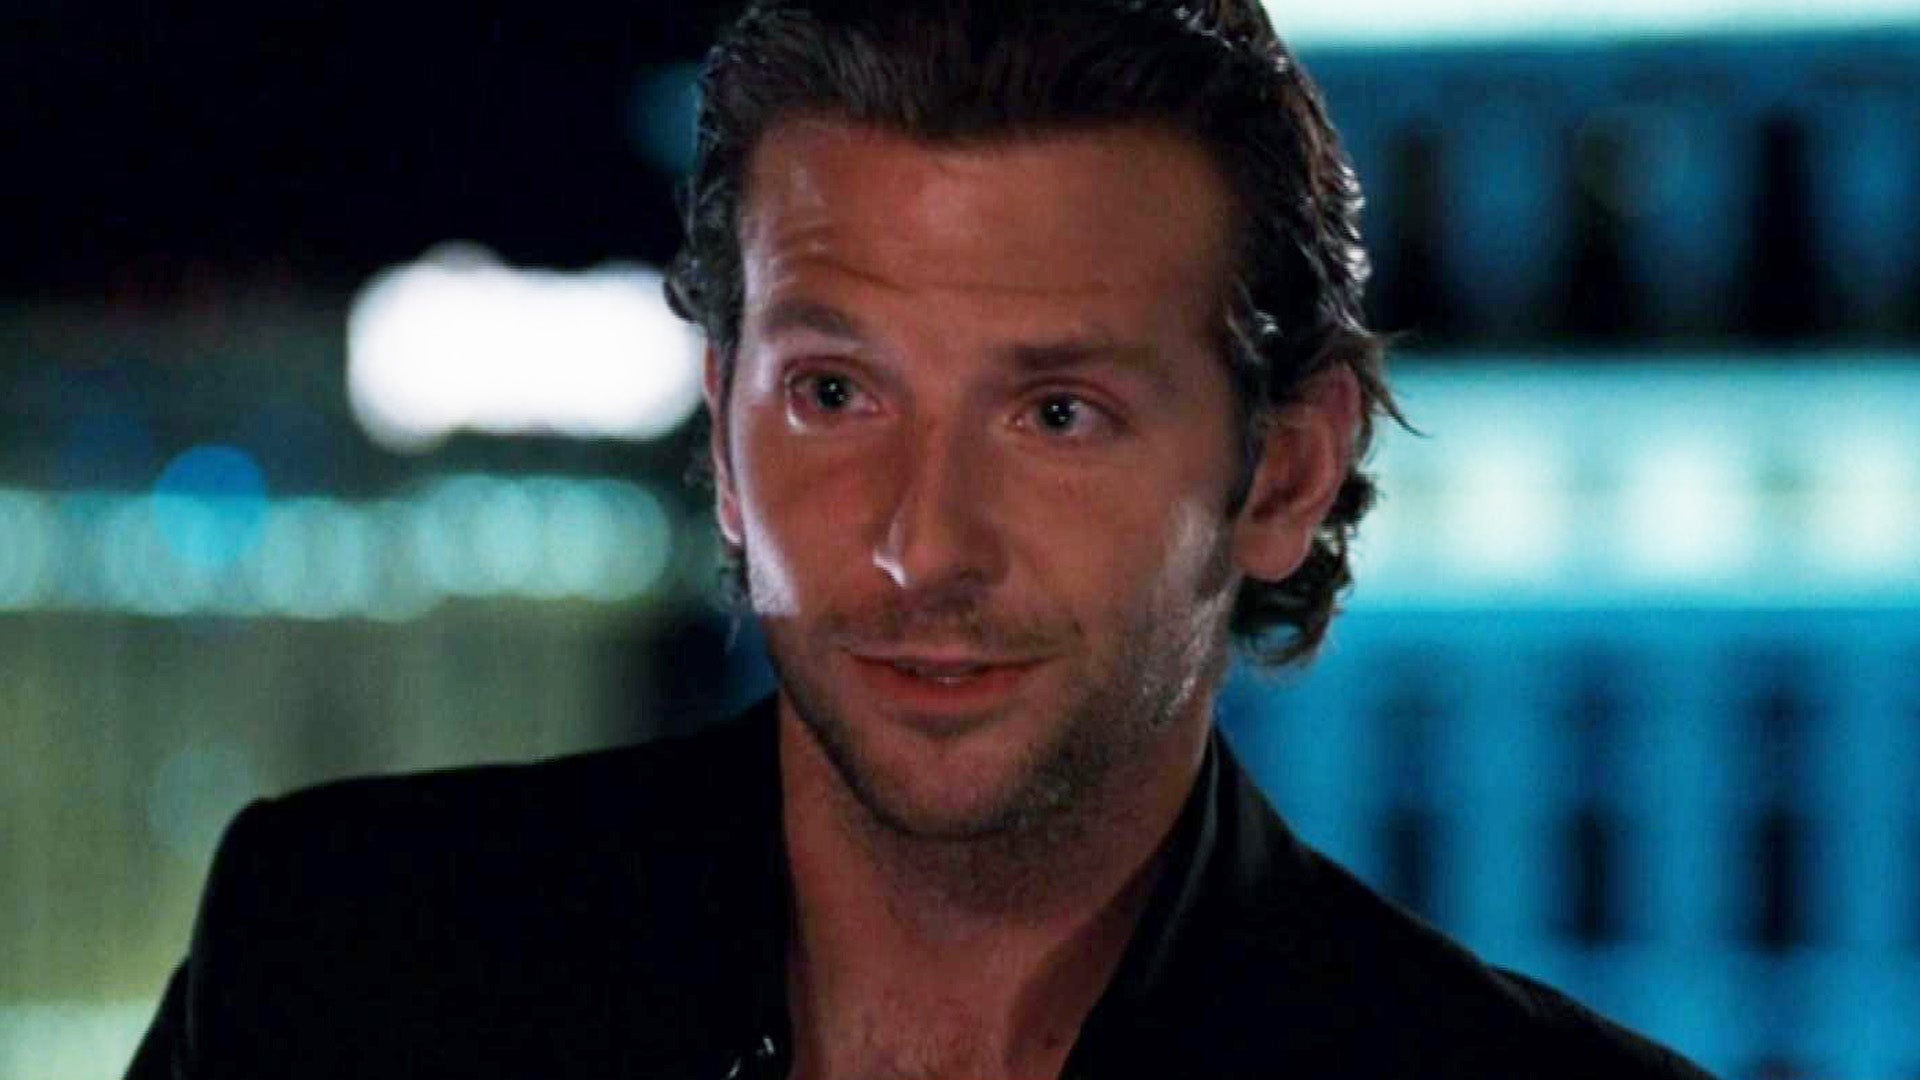 Bradley Cooper Says He Would Do ‘Hangover 4’ 'in an Instant’